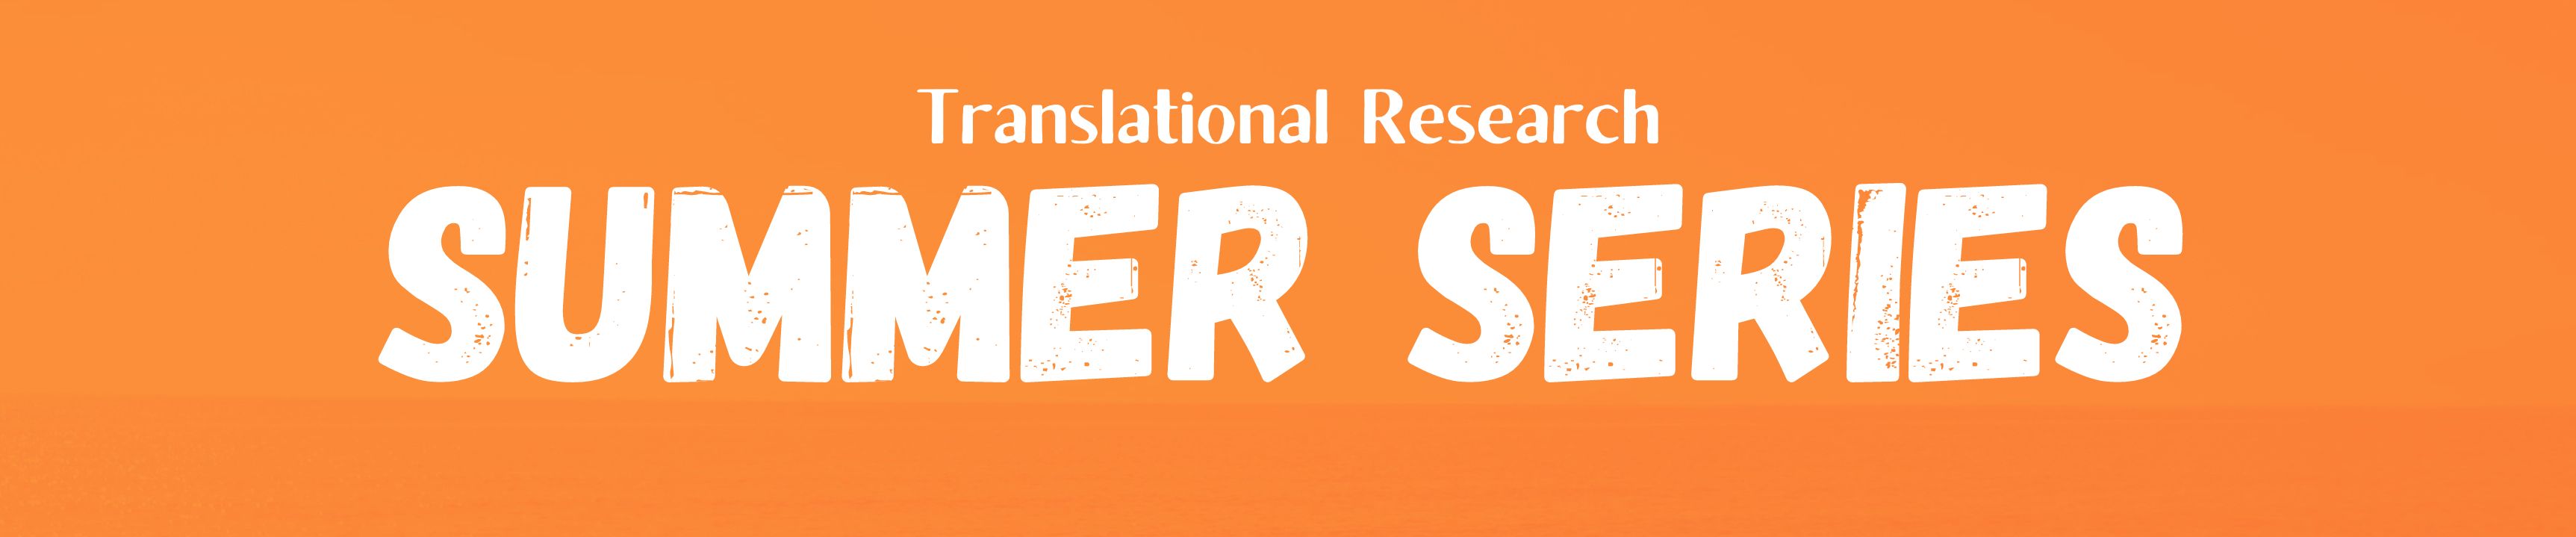 Translational Research Summer Series